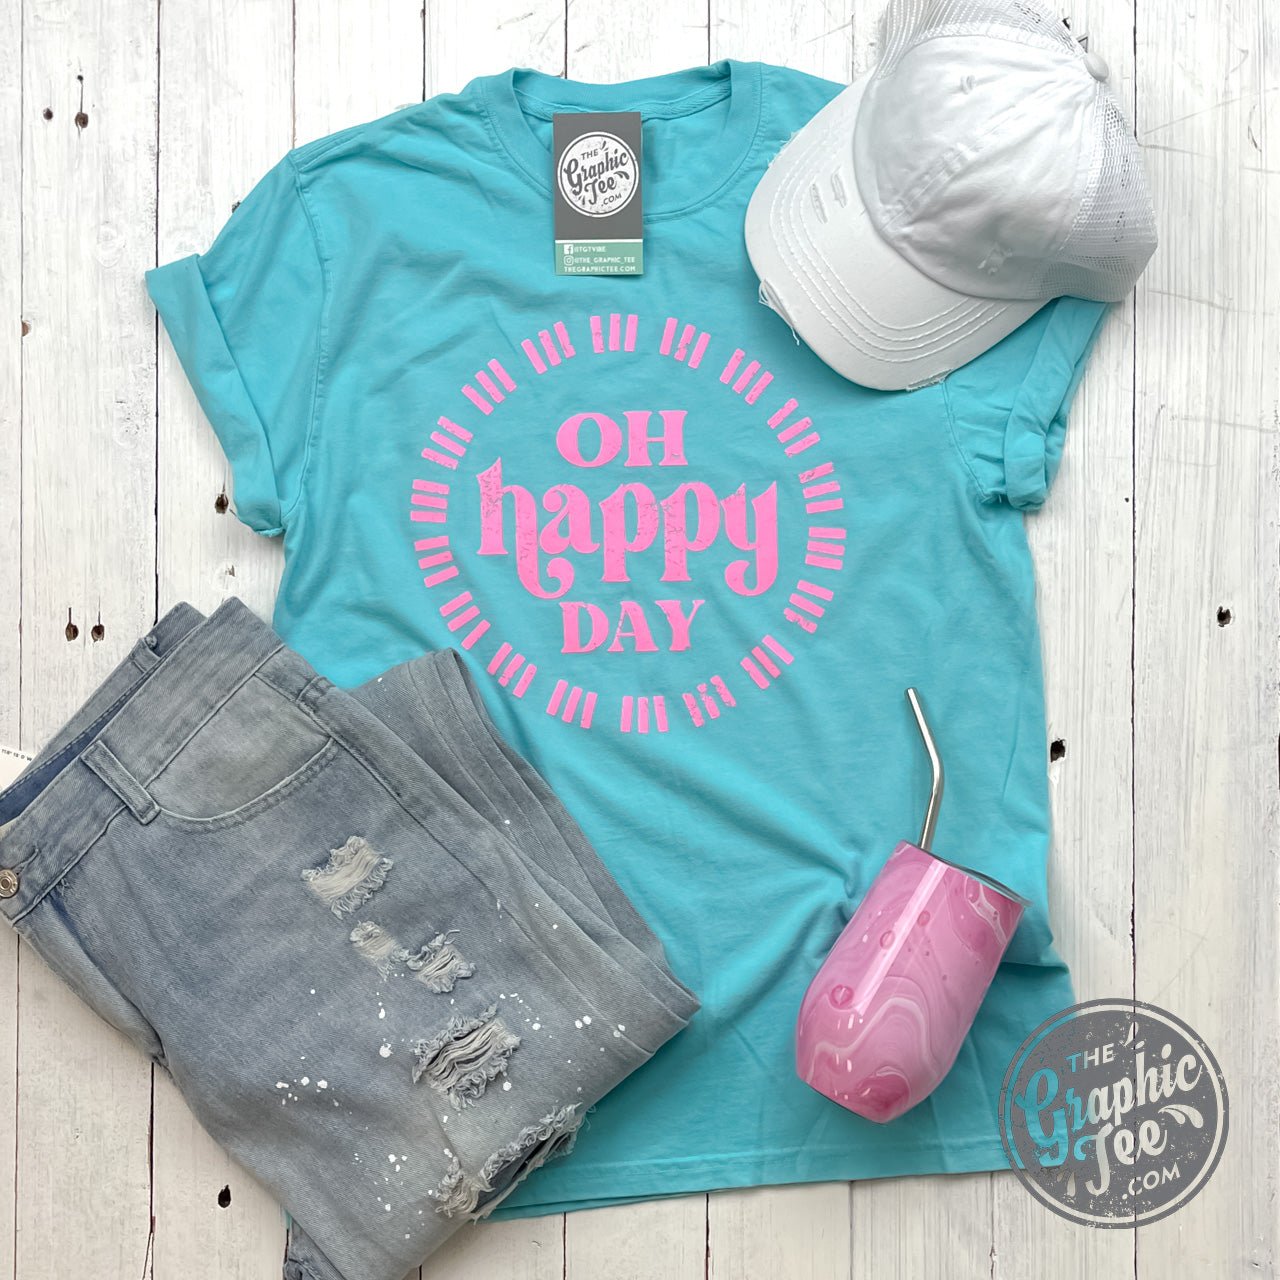 Oh Happy Day Garment Dyed Lagoon Blue Short Sleeve Crew Neck Tee - The Graphic Tee